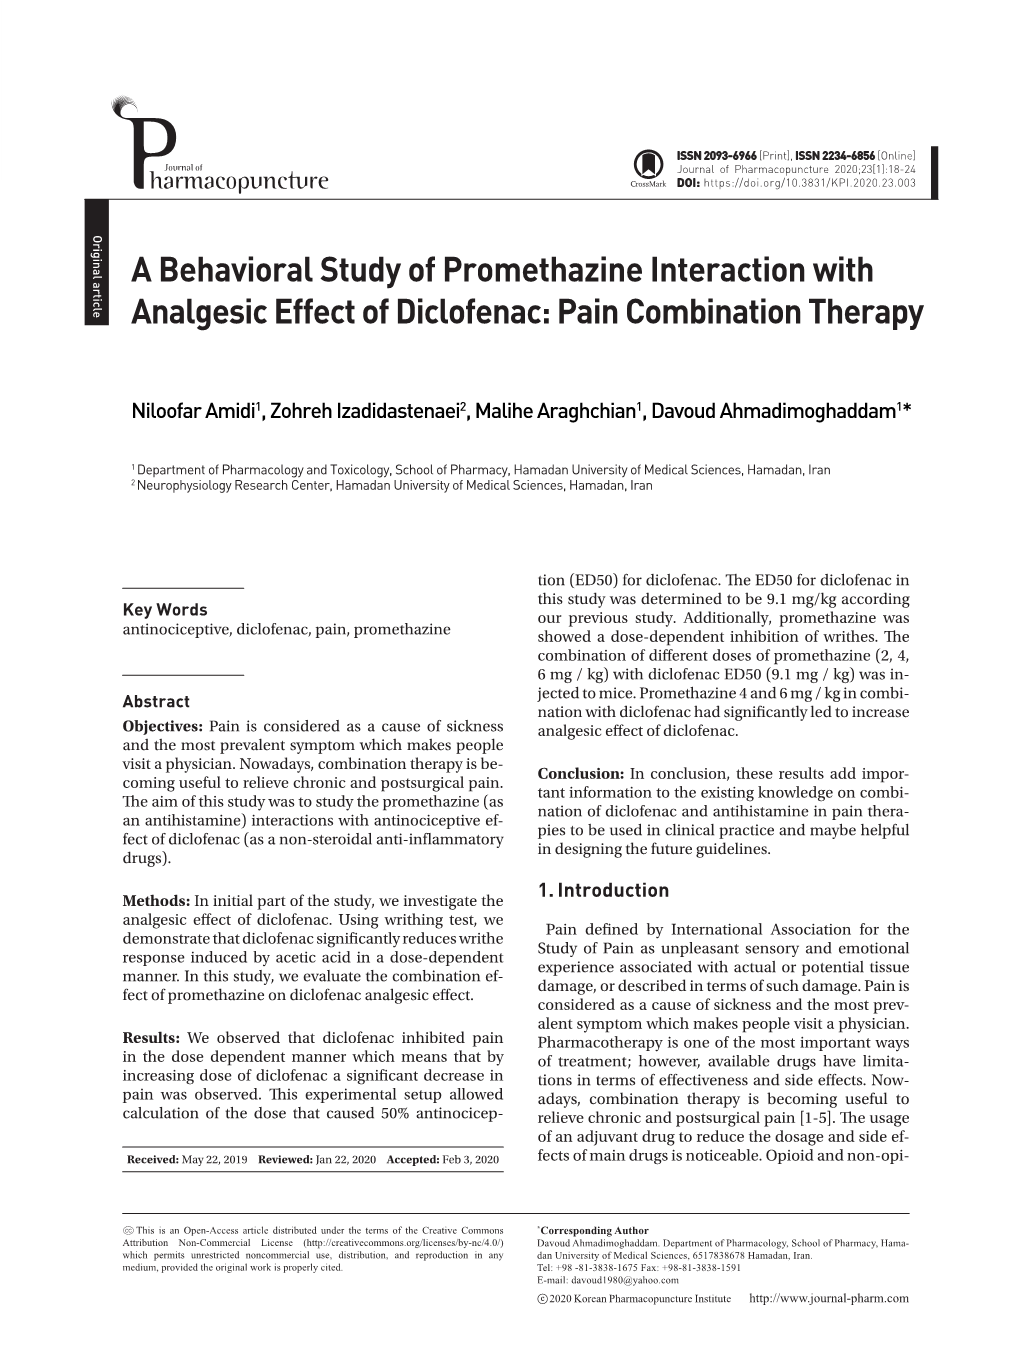 A Behavioral Study of Promethazine Interaction with Analgesic Effect of Diclofenac: Pain Combination Therapy